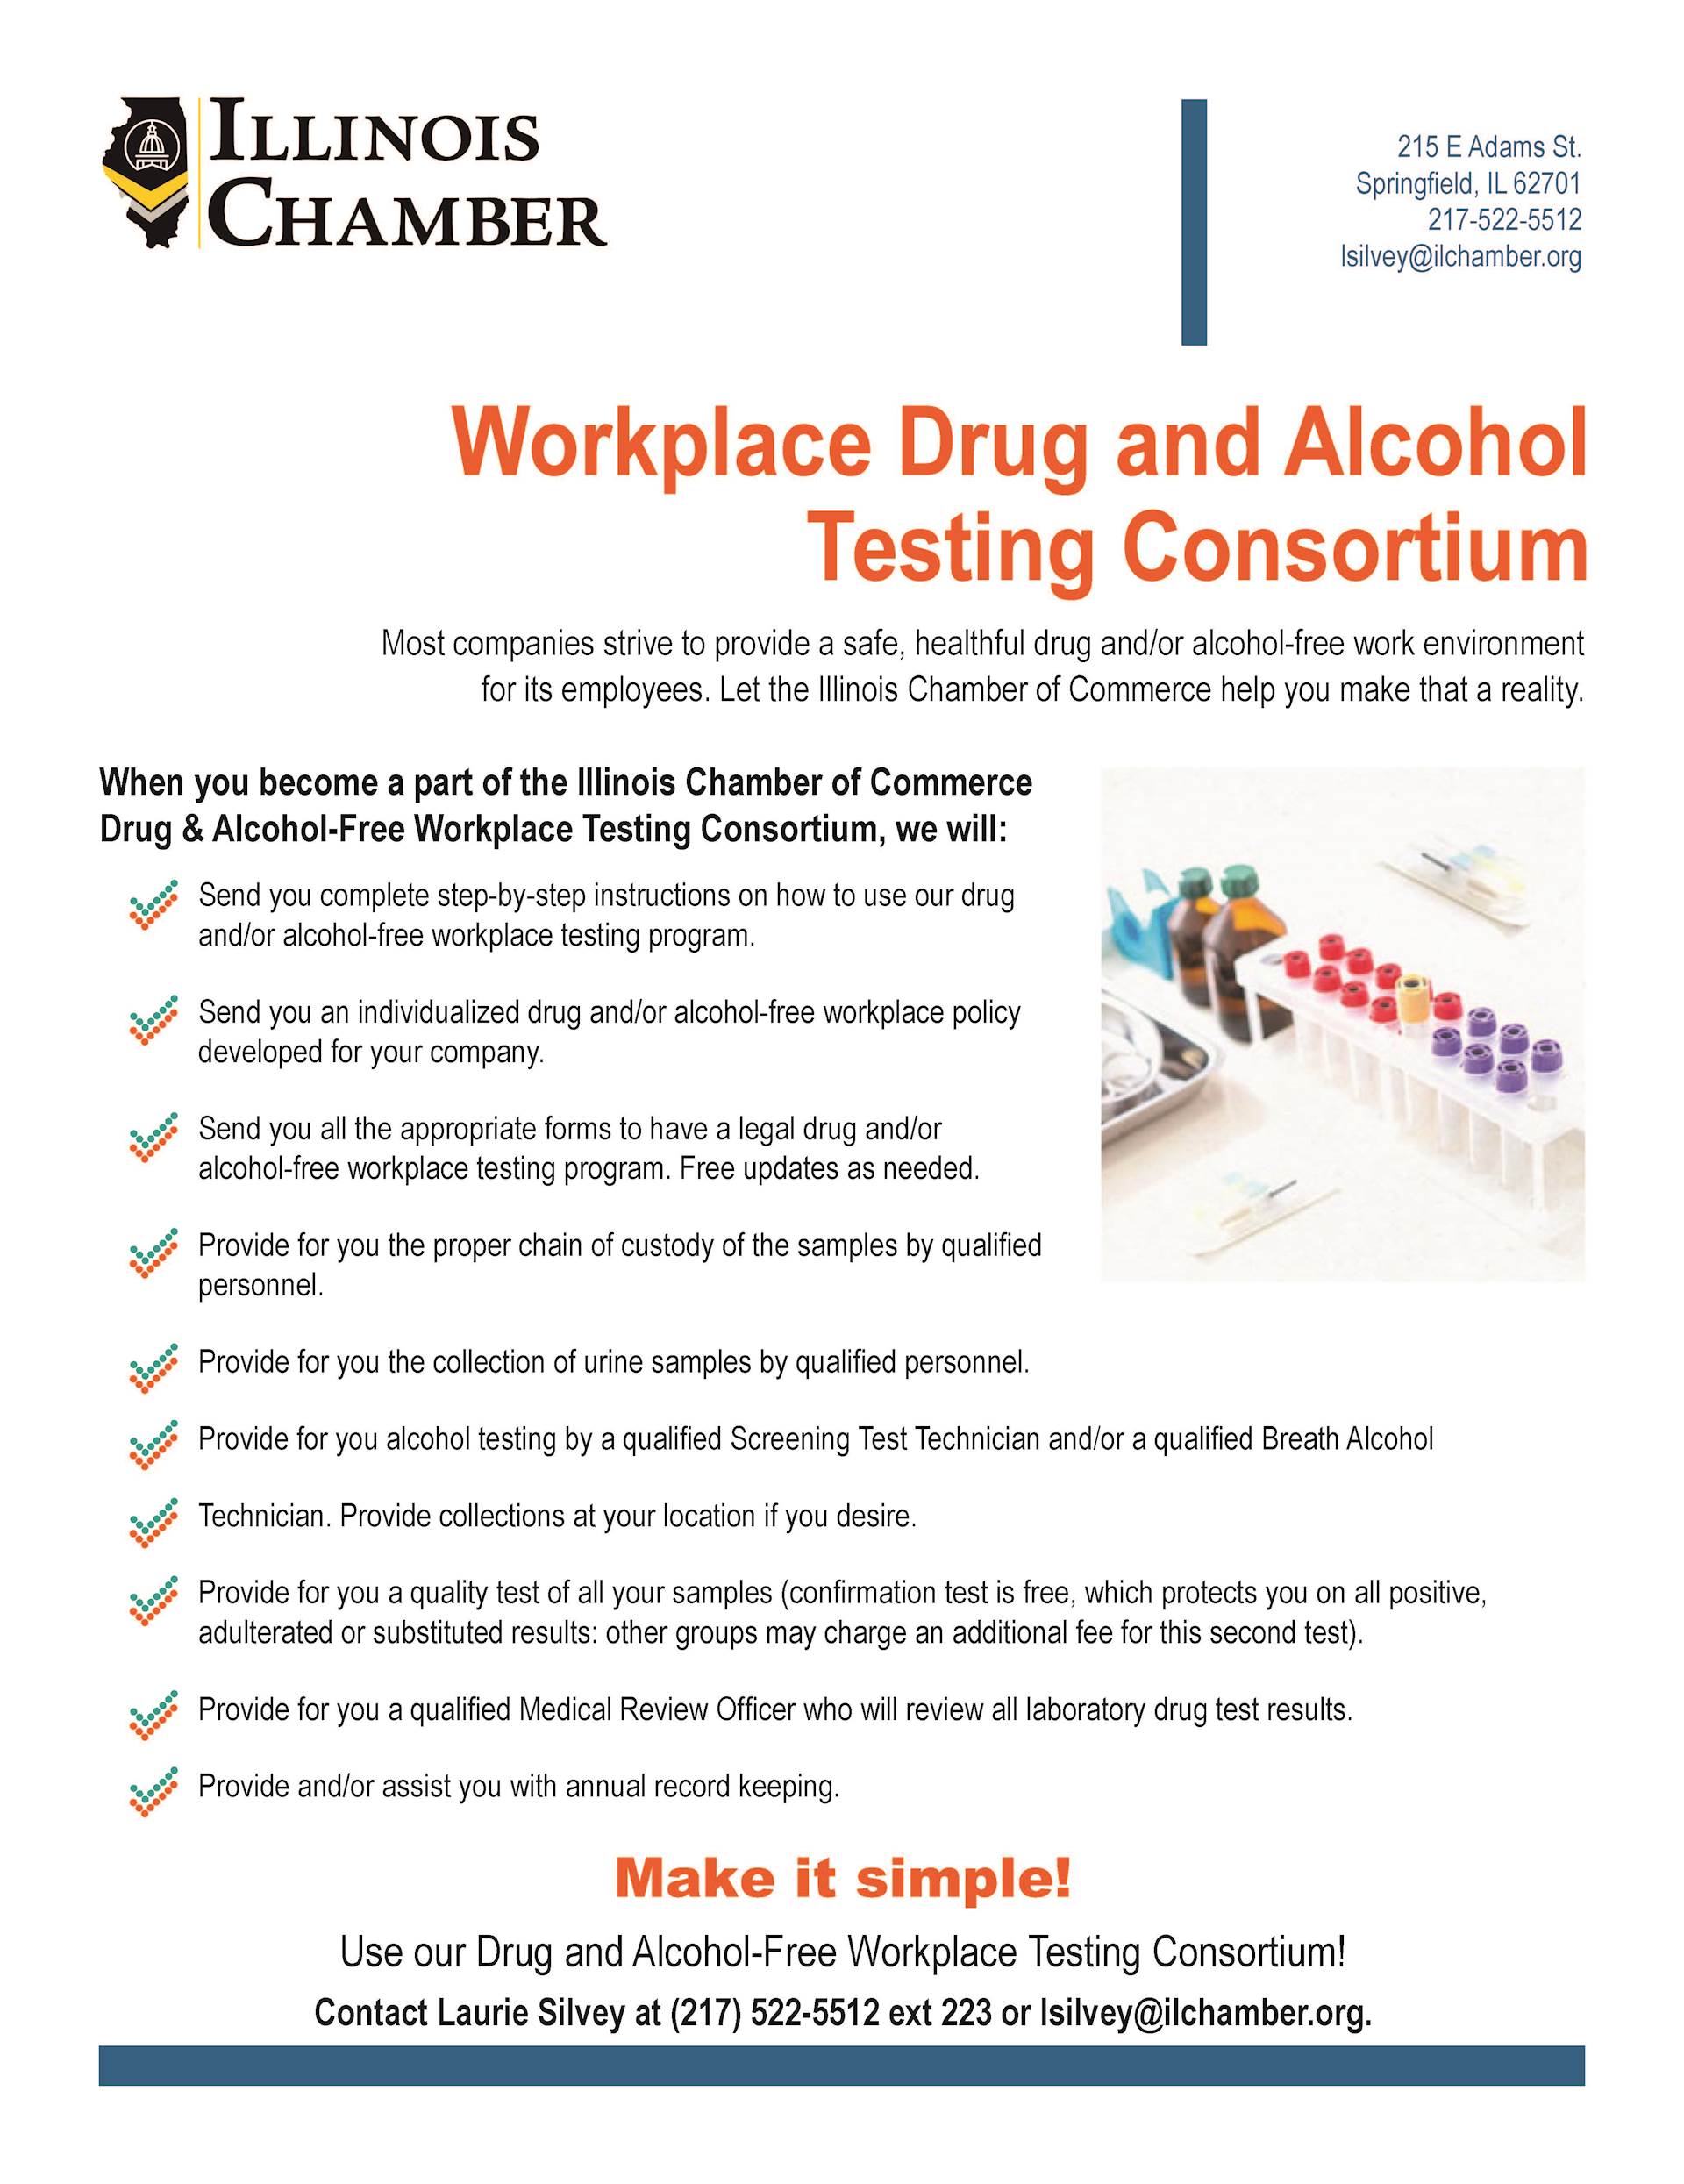 IL Chamber's Workplace Drug and Alcohol Testing Consortium